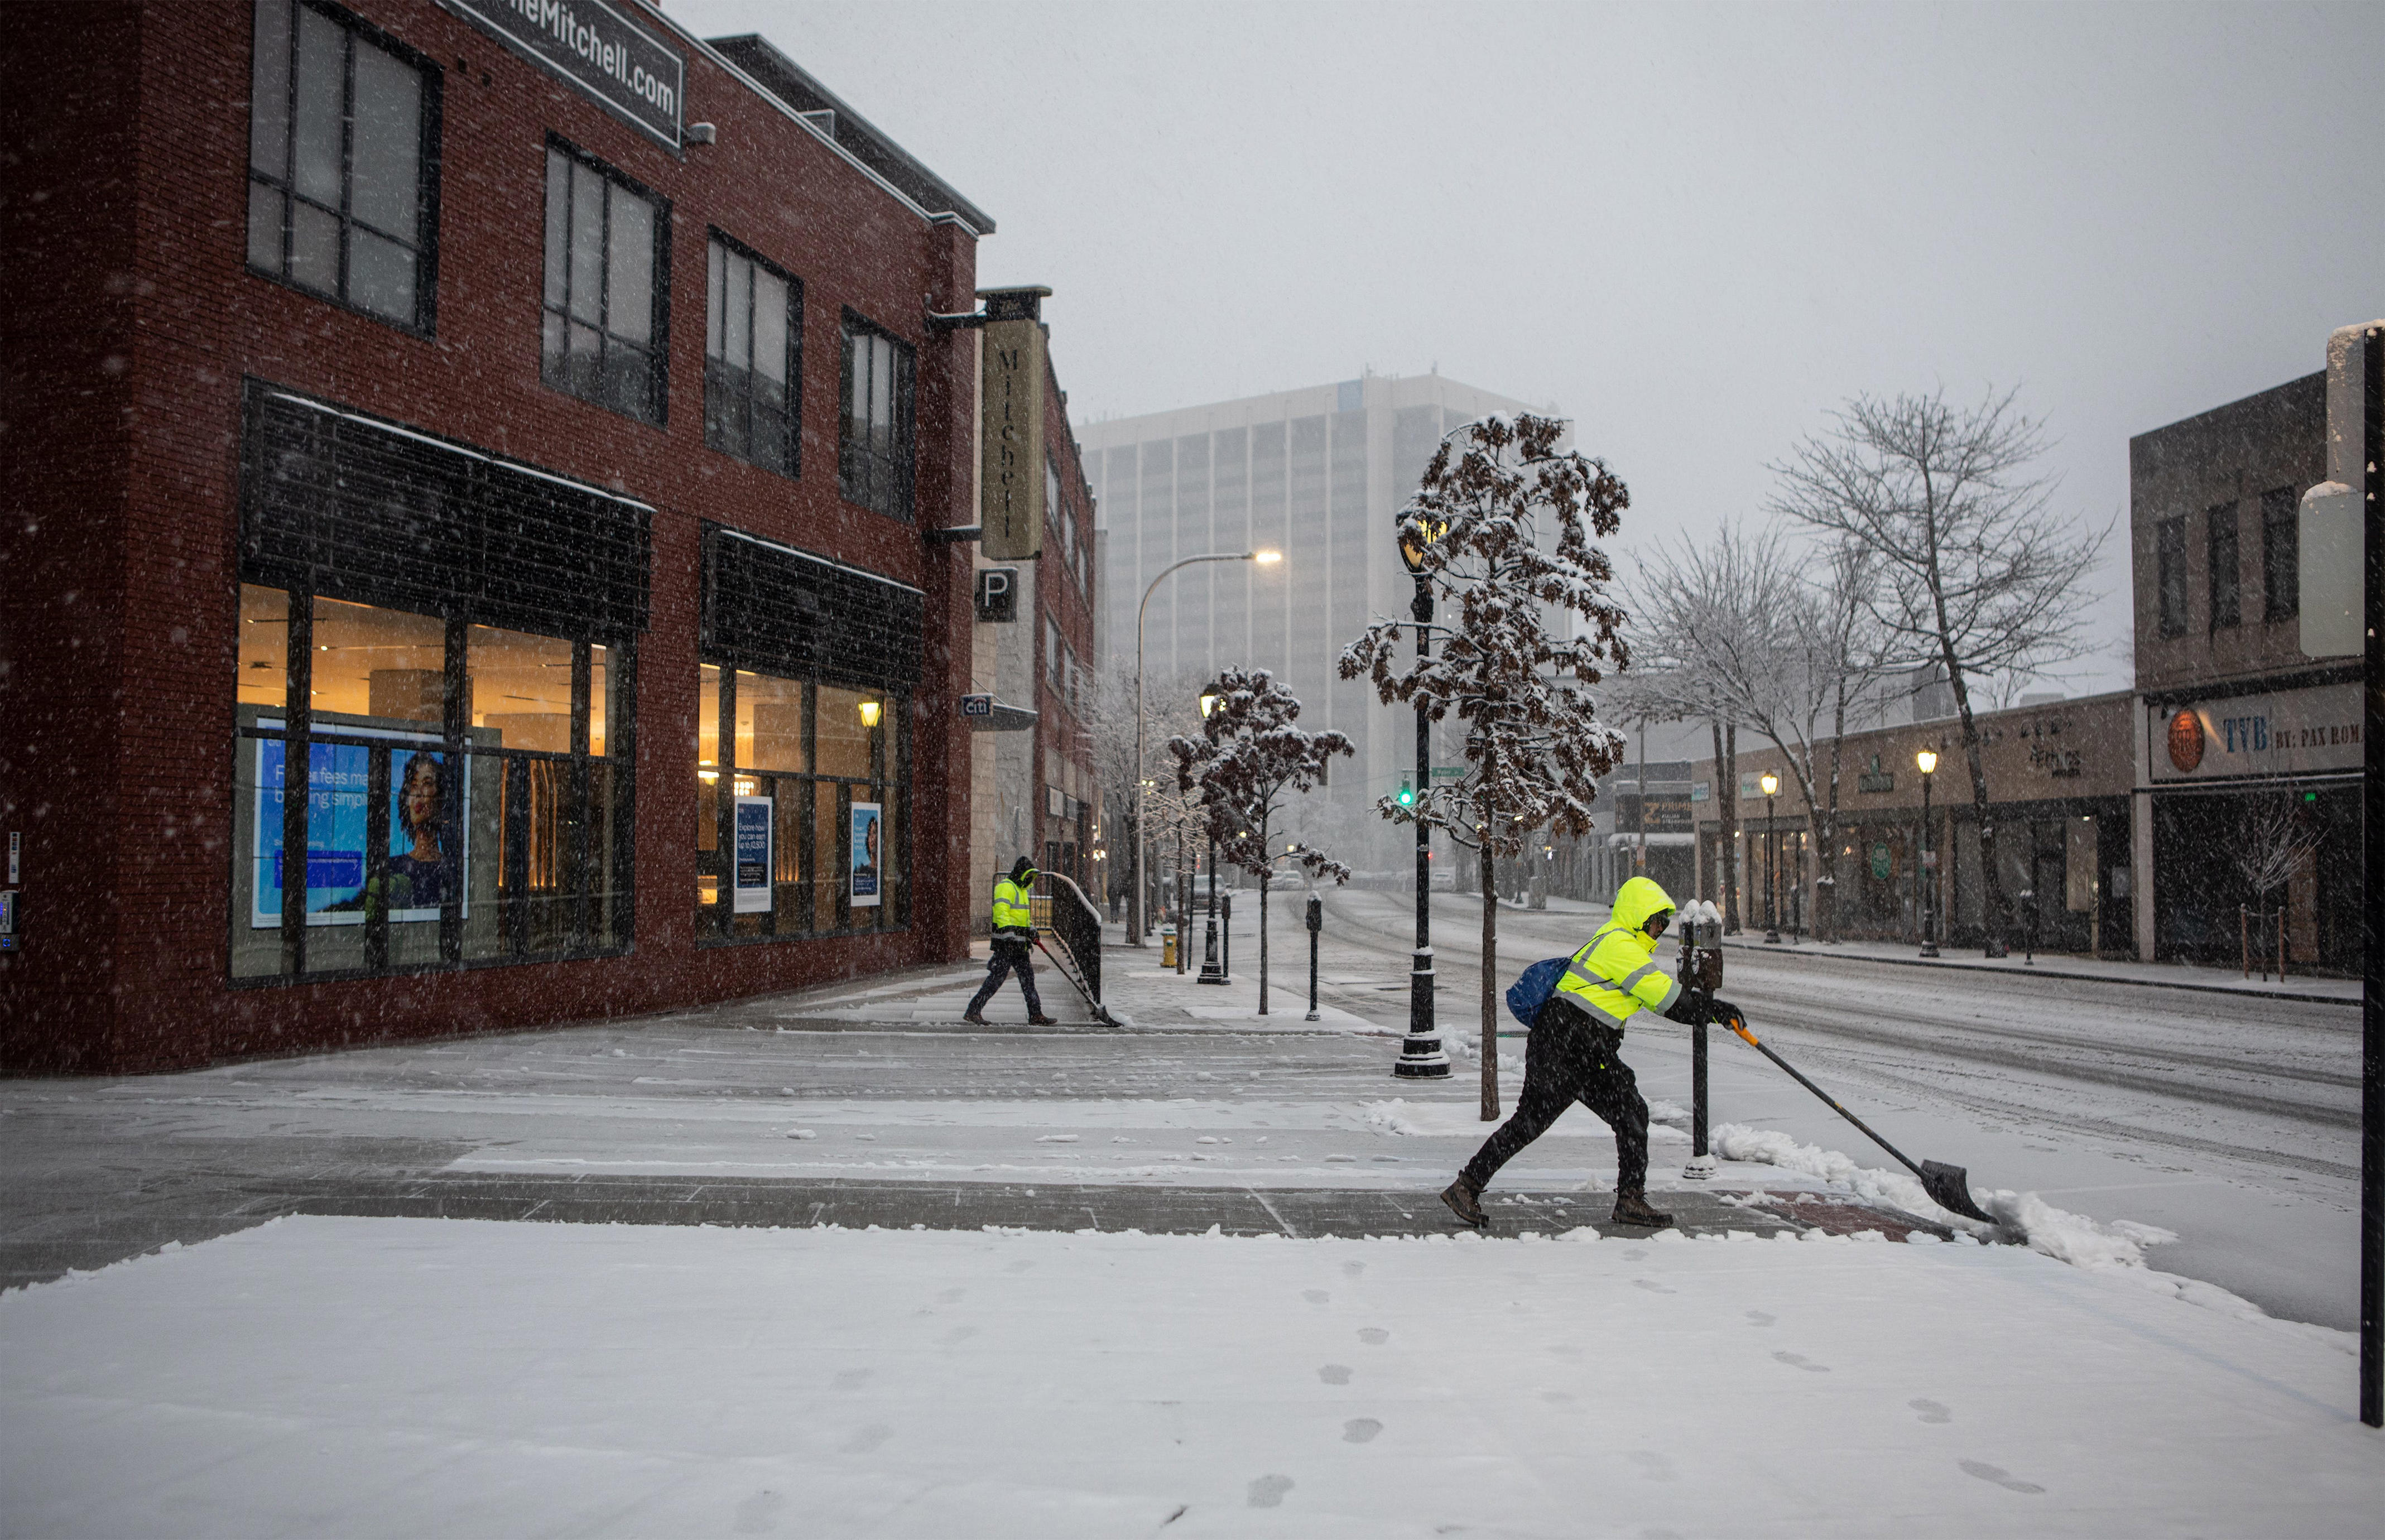 live updates: up to a foot of snow expected, could let up early afternoon